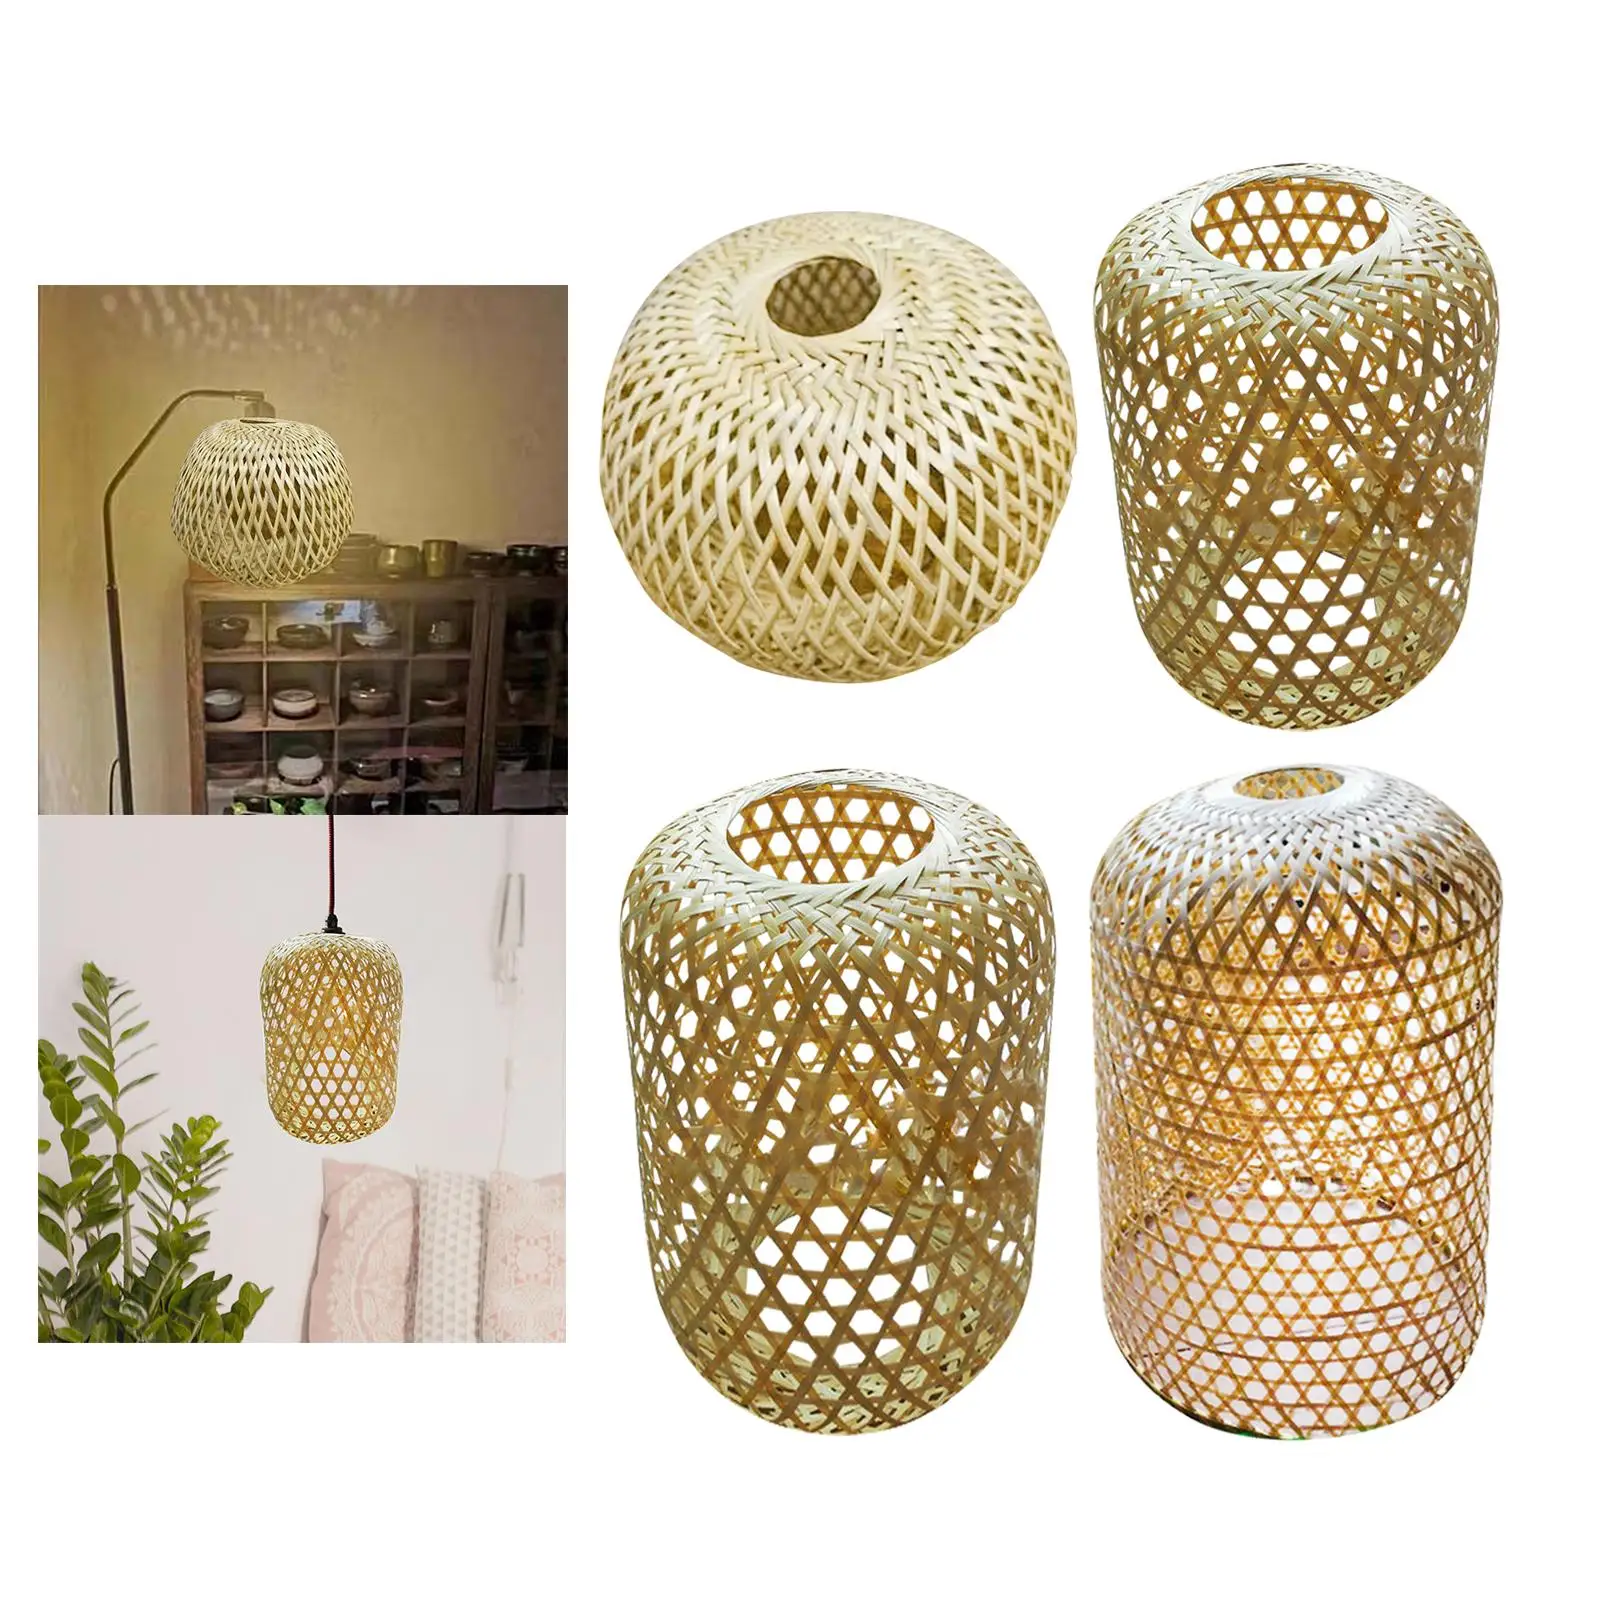 Handmade Weaving Lamp Shade, Ceiling Light Cover Hanging Lampshade for Hotel Cafe Decor